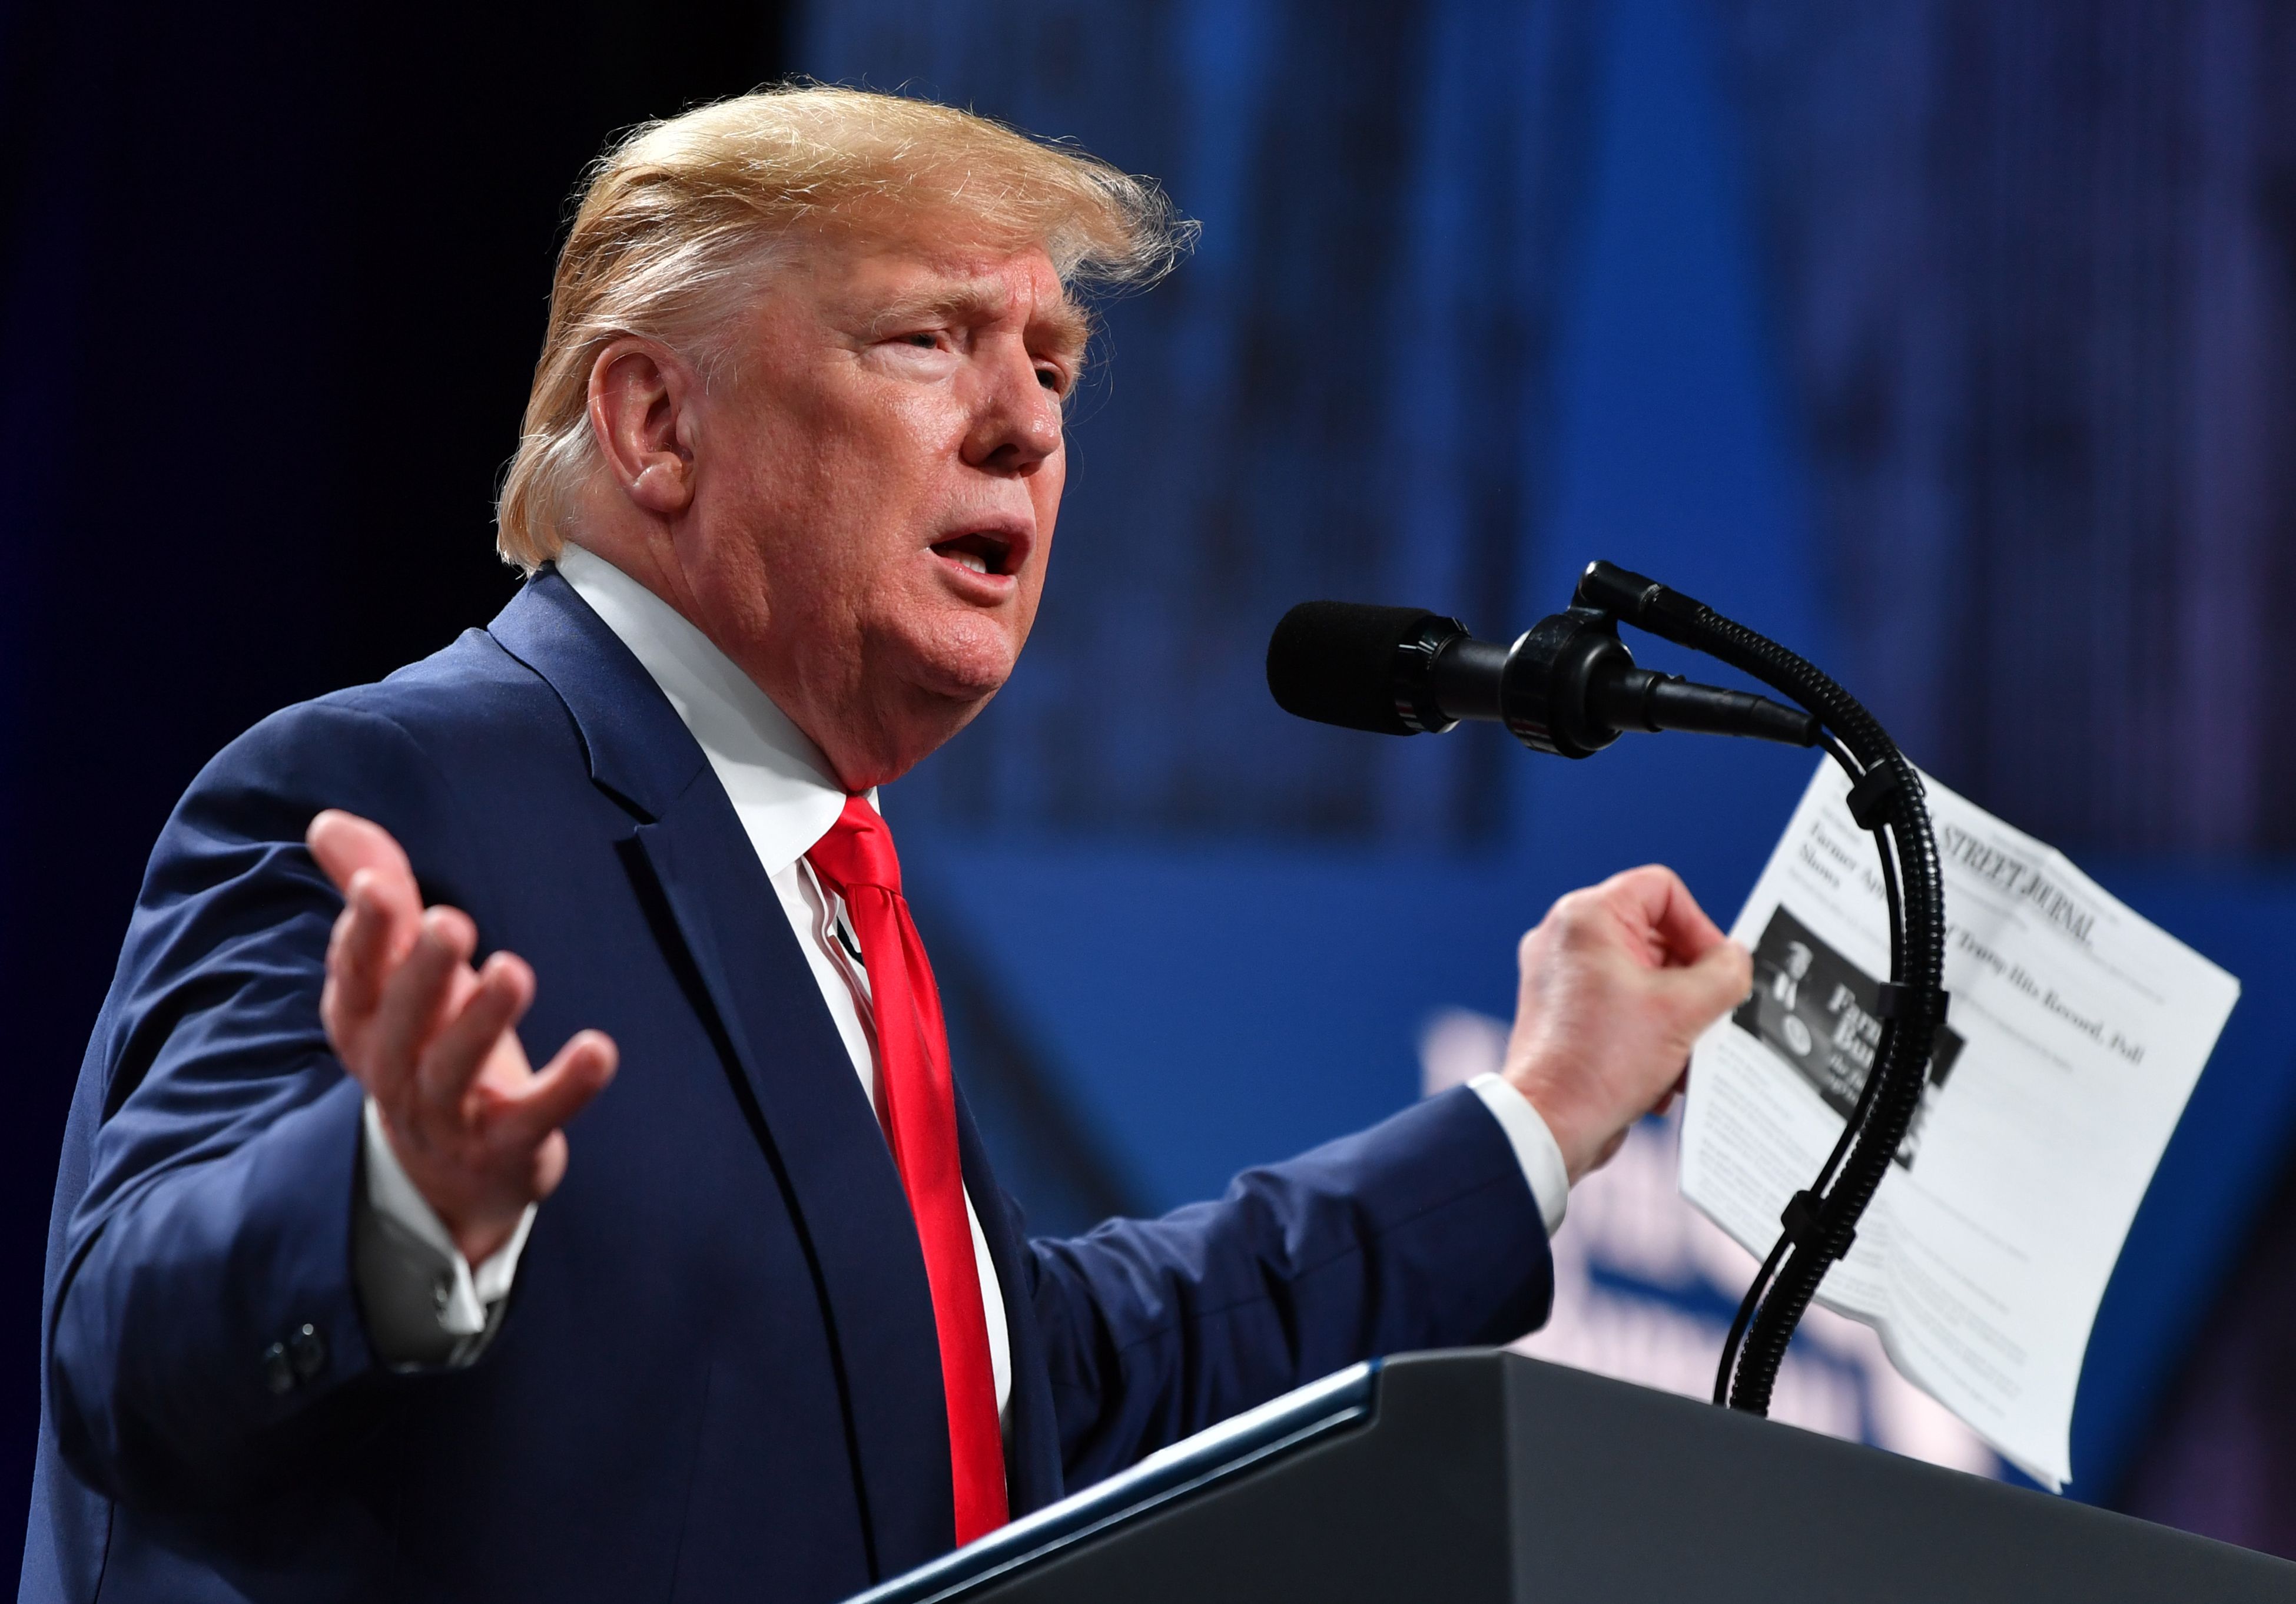 US President Donald Trump speaks at the American Farm Bureau Federation Annual Convention and Trade Show in Austin, Texas on January 19, 2020. (Photo by Nicholas Kamm / AFP) (Photo by NICHOLAS KAMM/AFP via Getty Images)